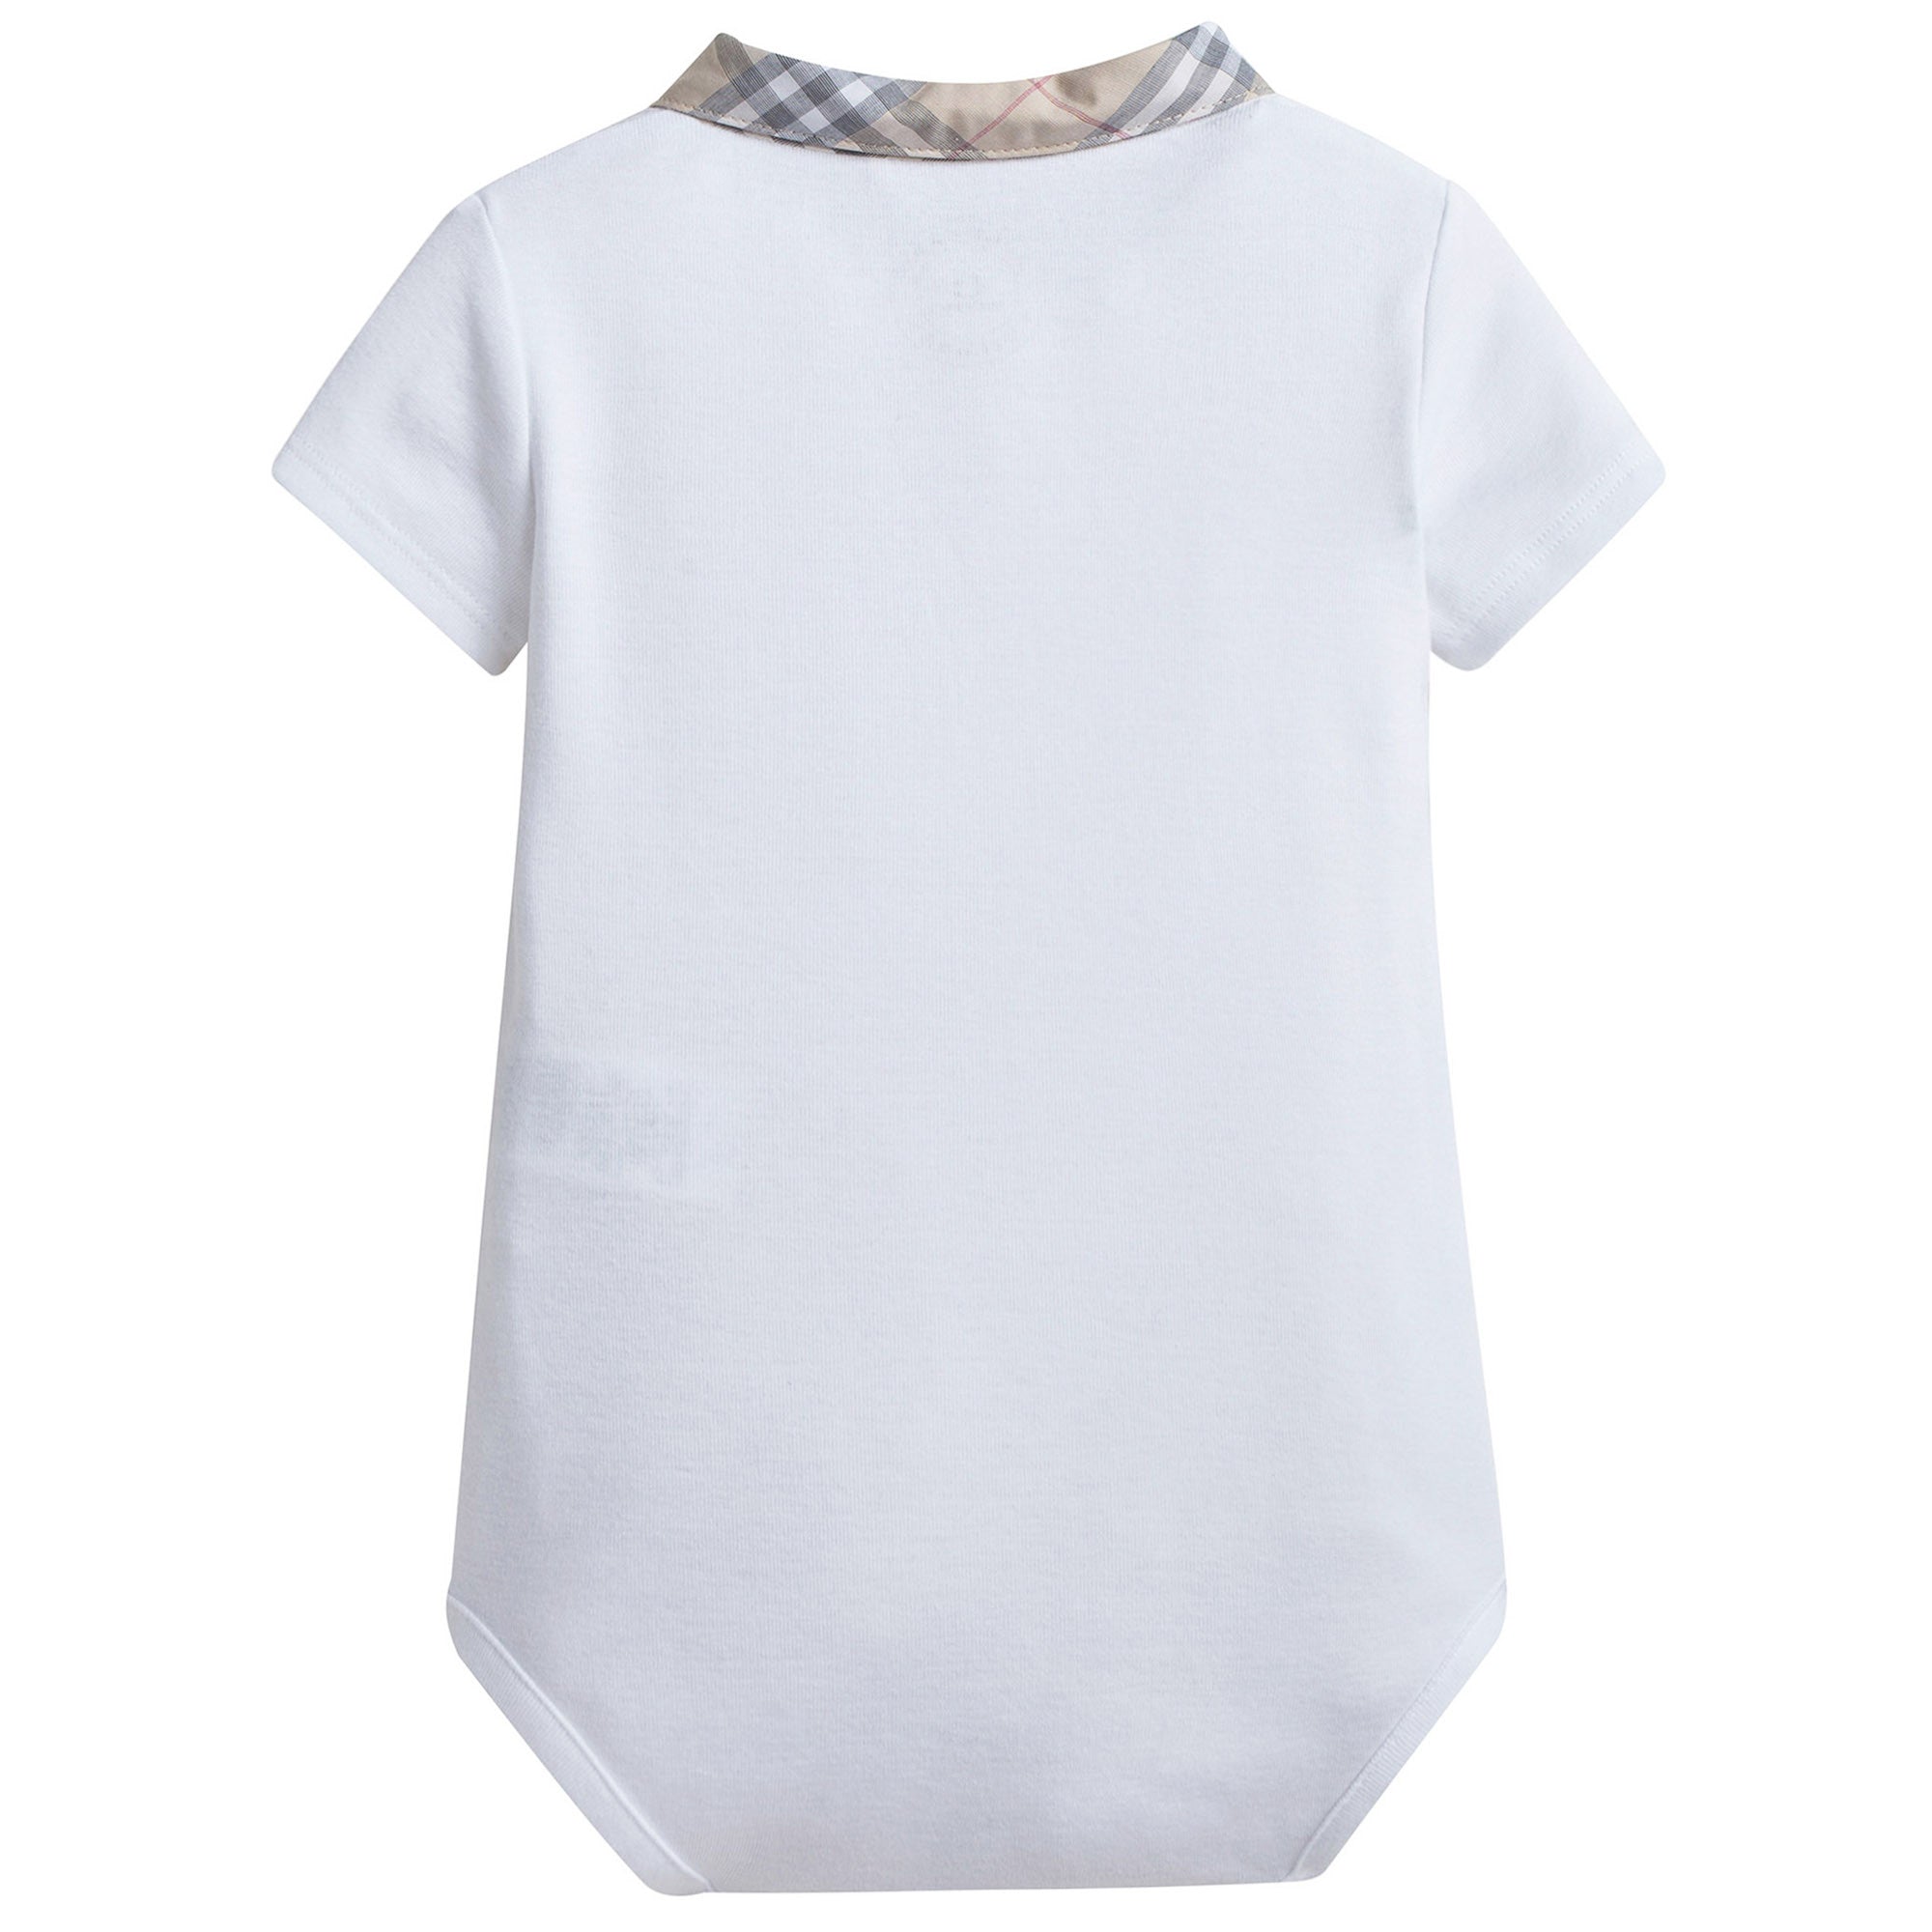 Baby Boys White Cotton Babysuit With Check Collar